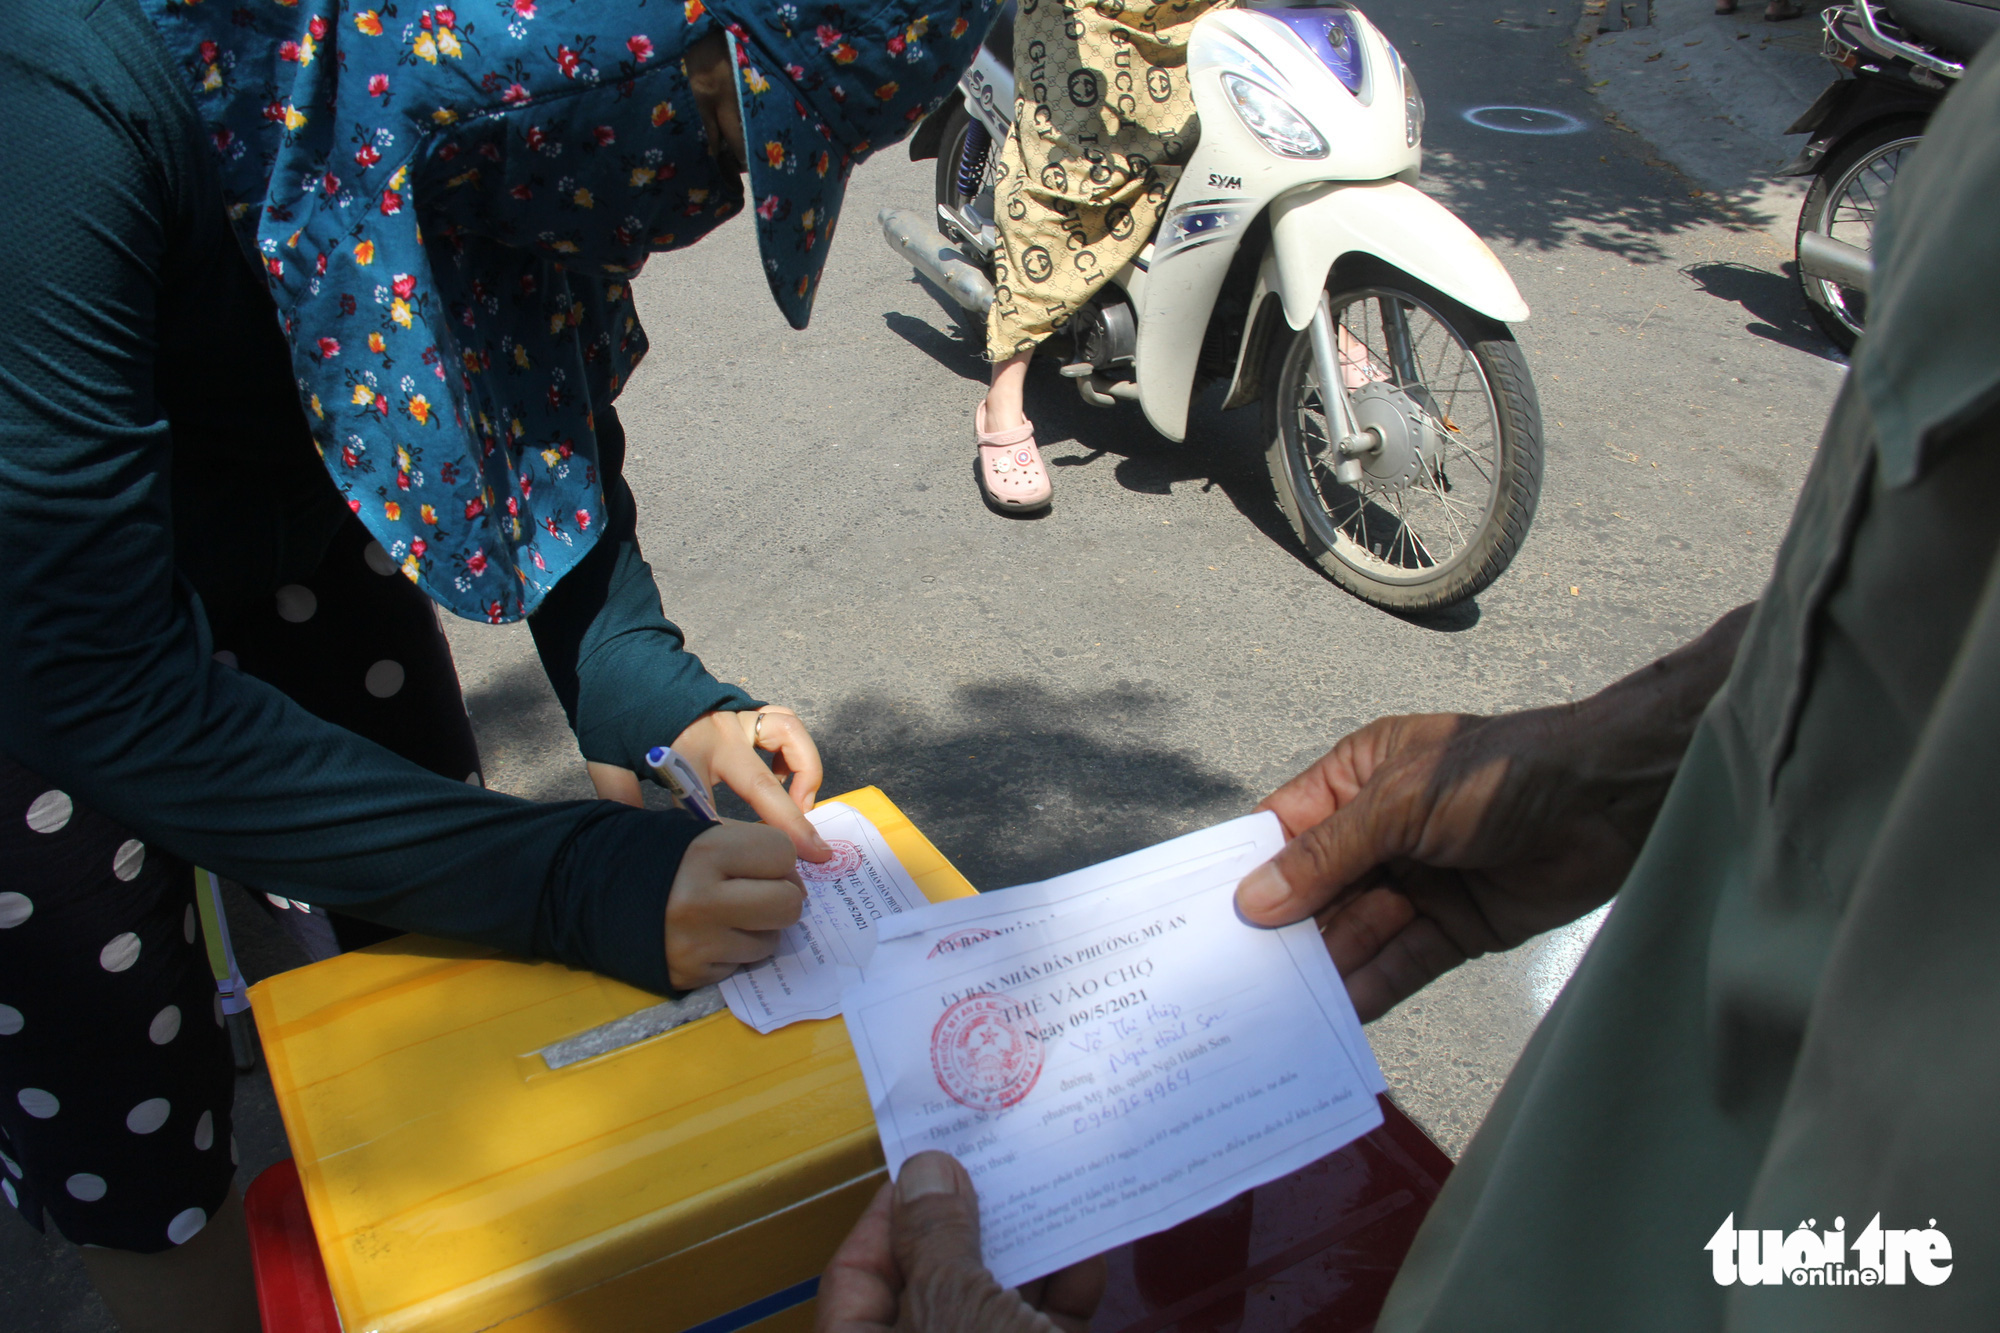 A resident fills in personal information on an ‘admission ticket’ before entering a market in Da Nang City, Vietnam, May 9, 2021. Photo: Truong Trung / Tuoi Tre